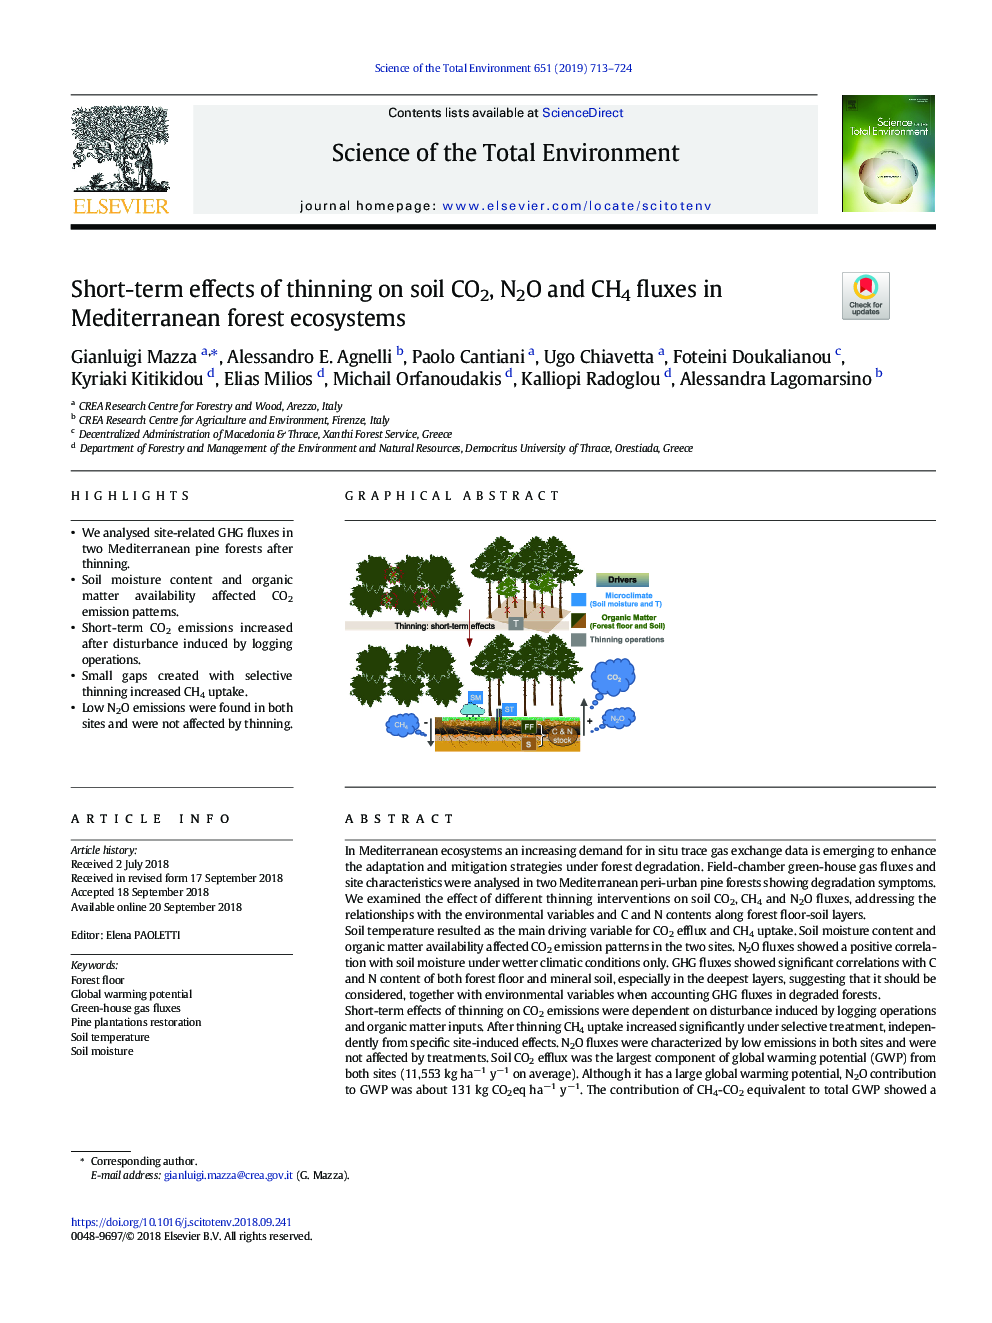 Short-term effects of thinning on soil CO2, N2O and CH4 fluxes in Mediterranean forest ecosystems